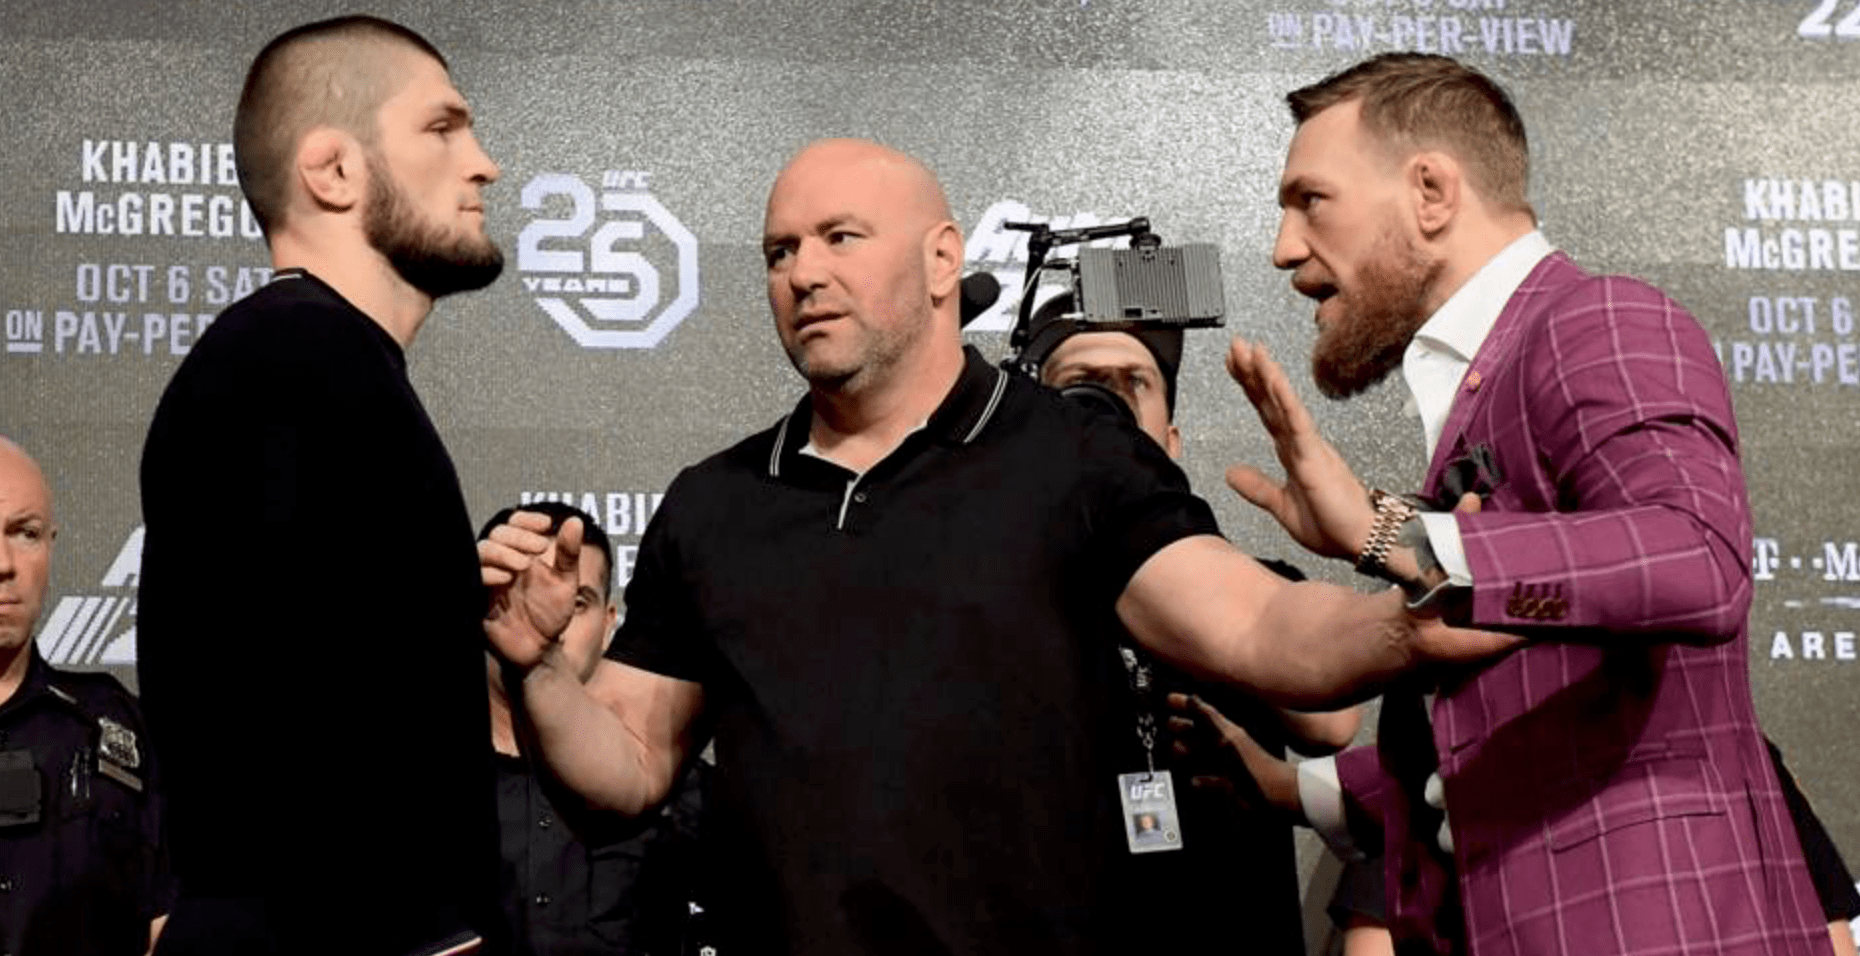 UFC: McGregor’s Coach And Khabib’s Dad Discuss Their Upcoming Fights